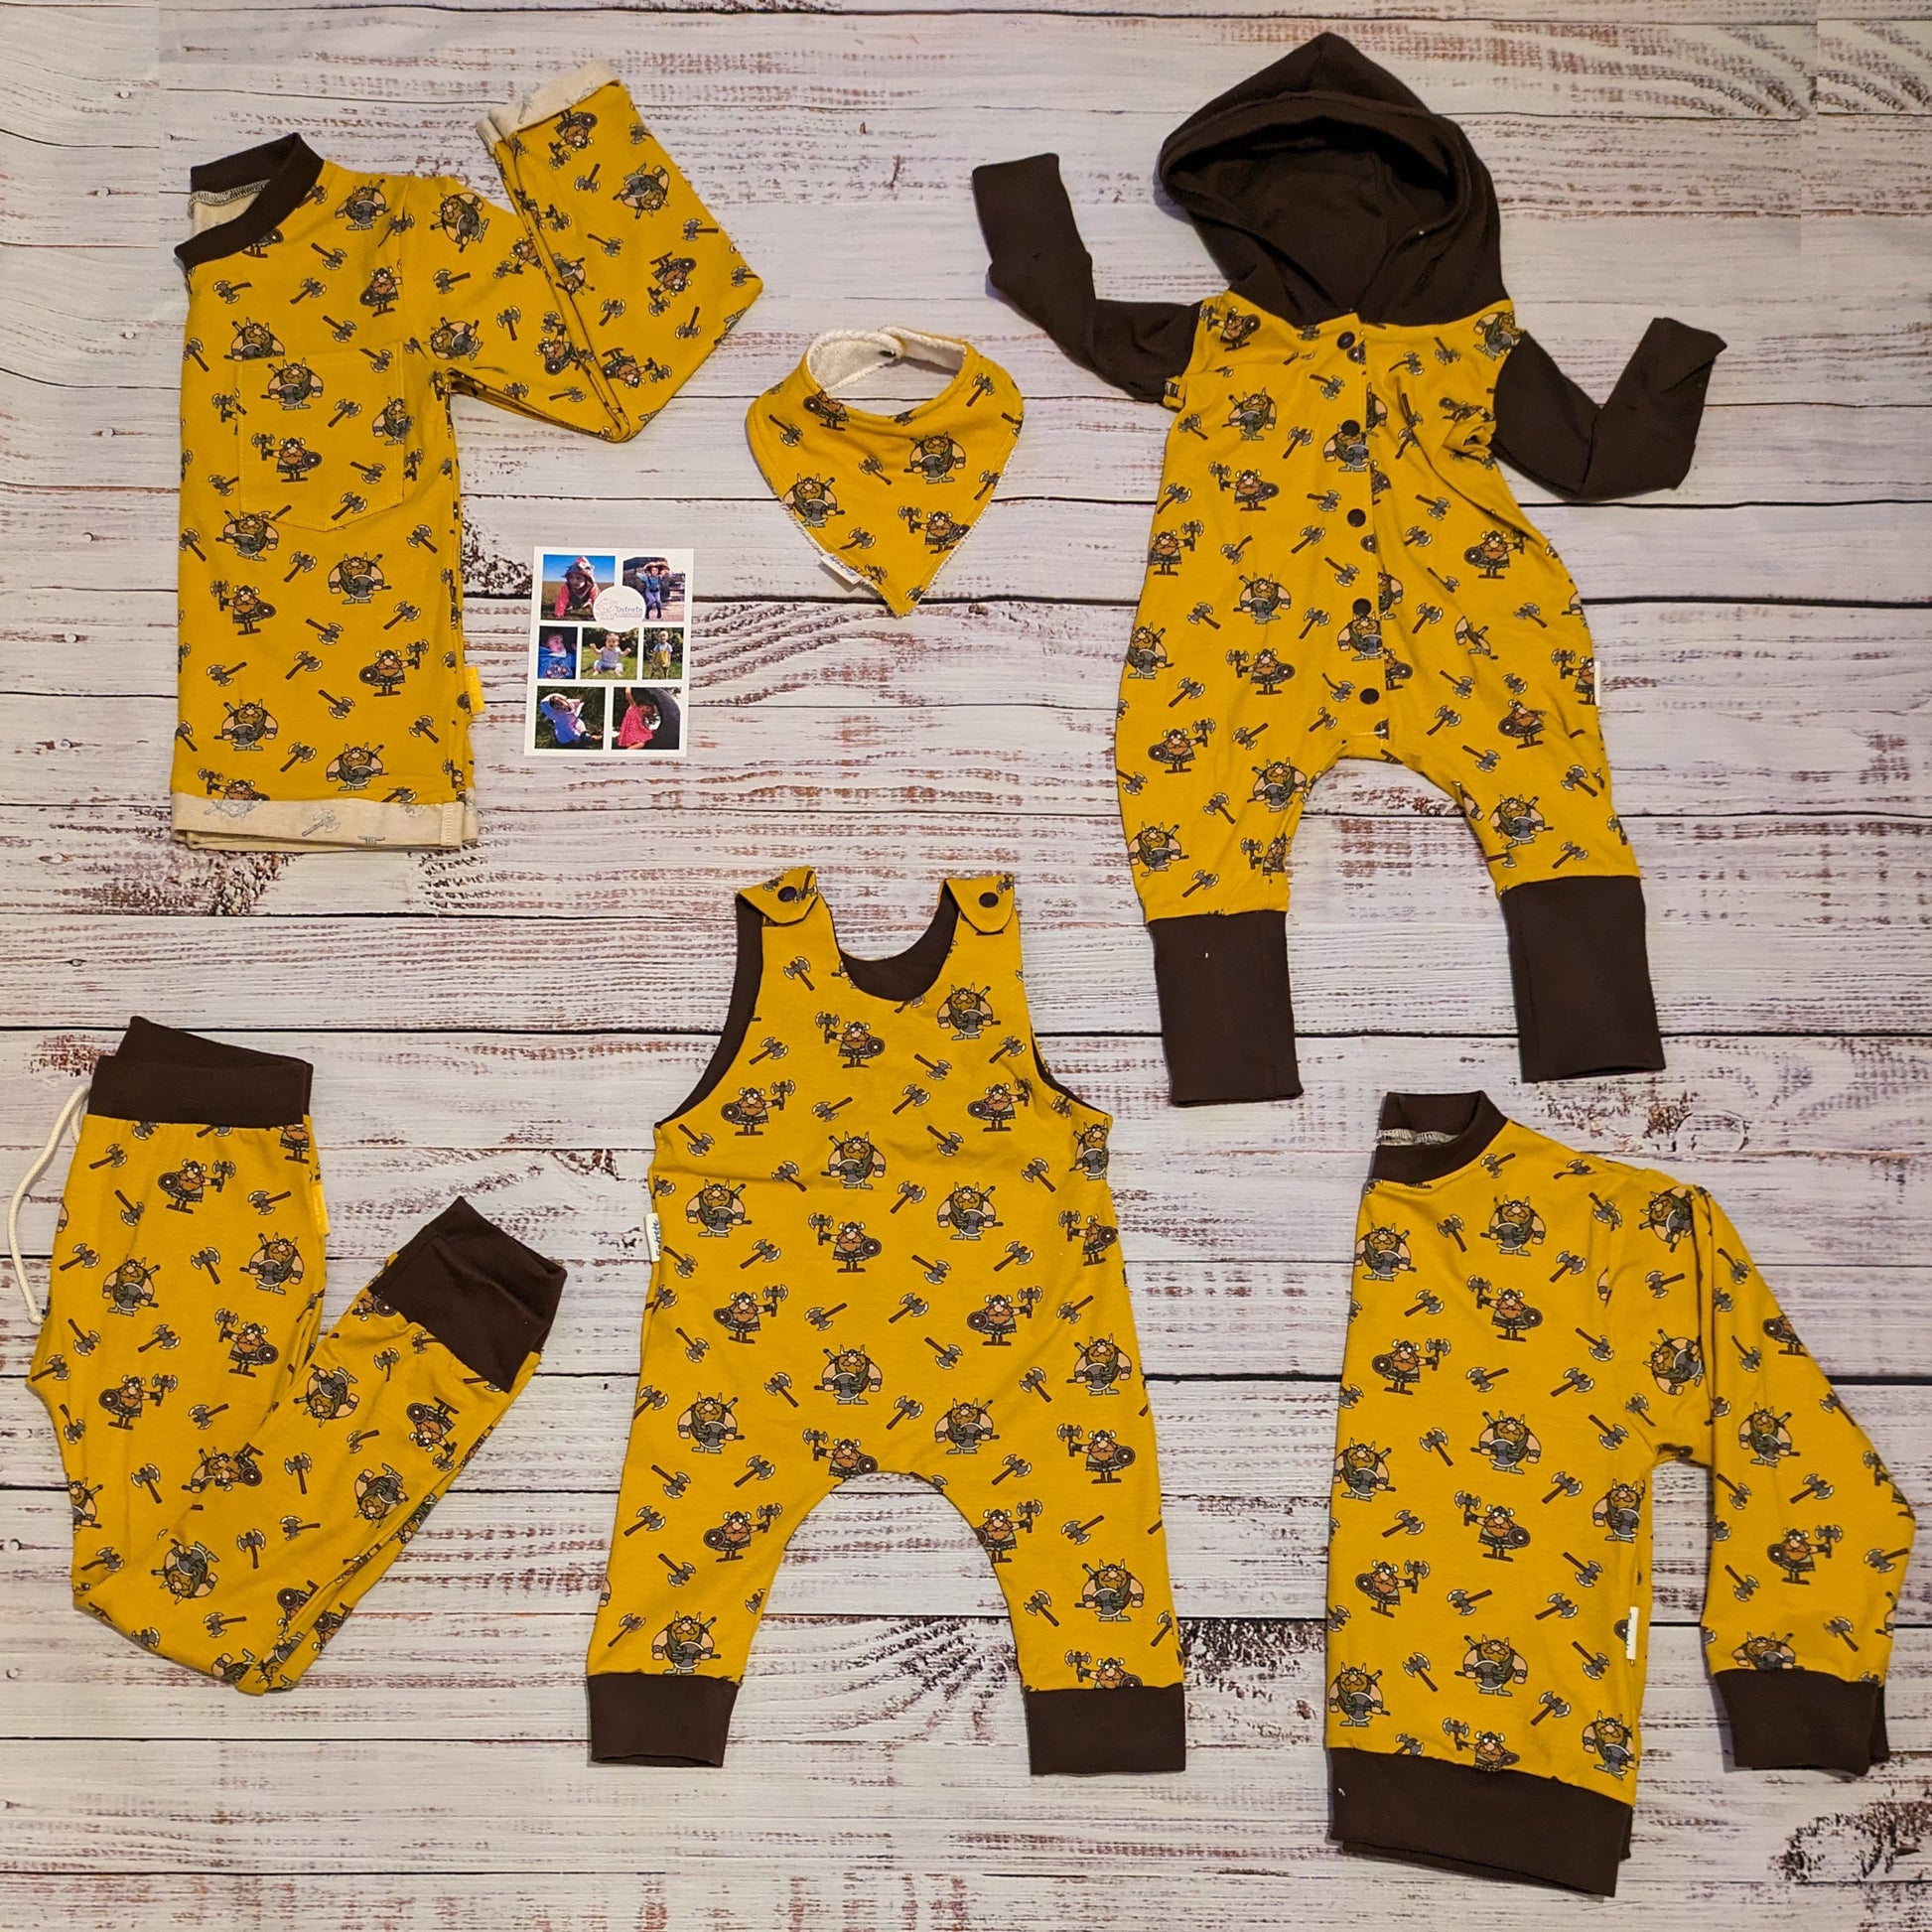 Check out the entire mustard Vikings range, including rompers, harem pants, sweatshirts and tees. Just type mustard Vikings in the search bar.